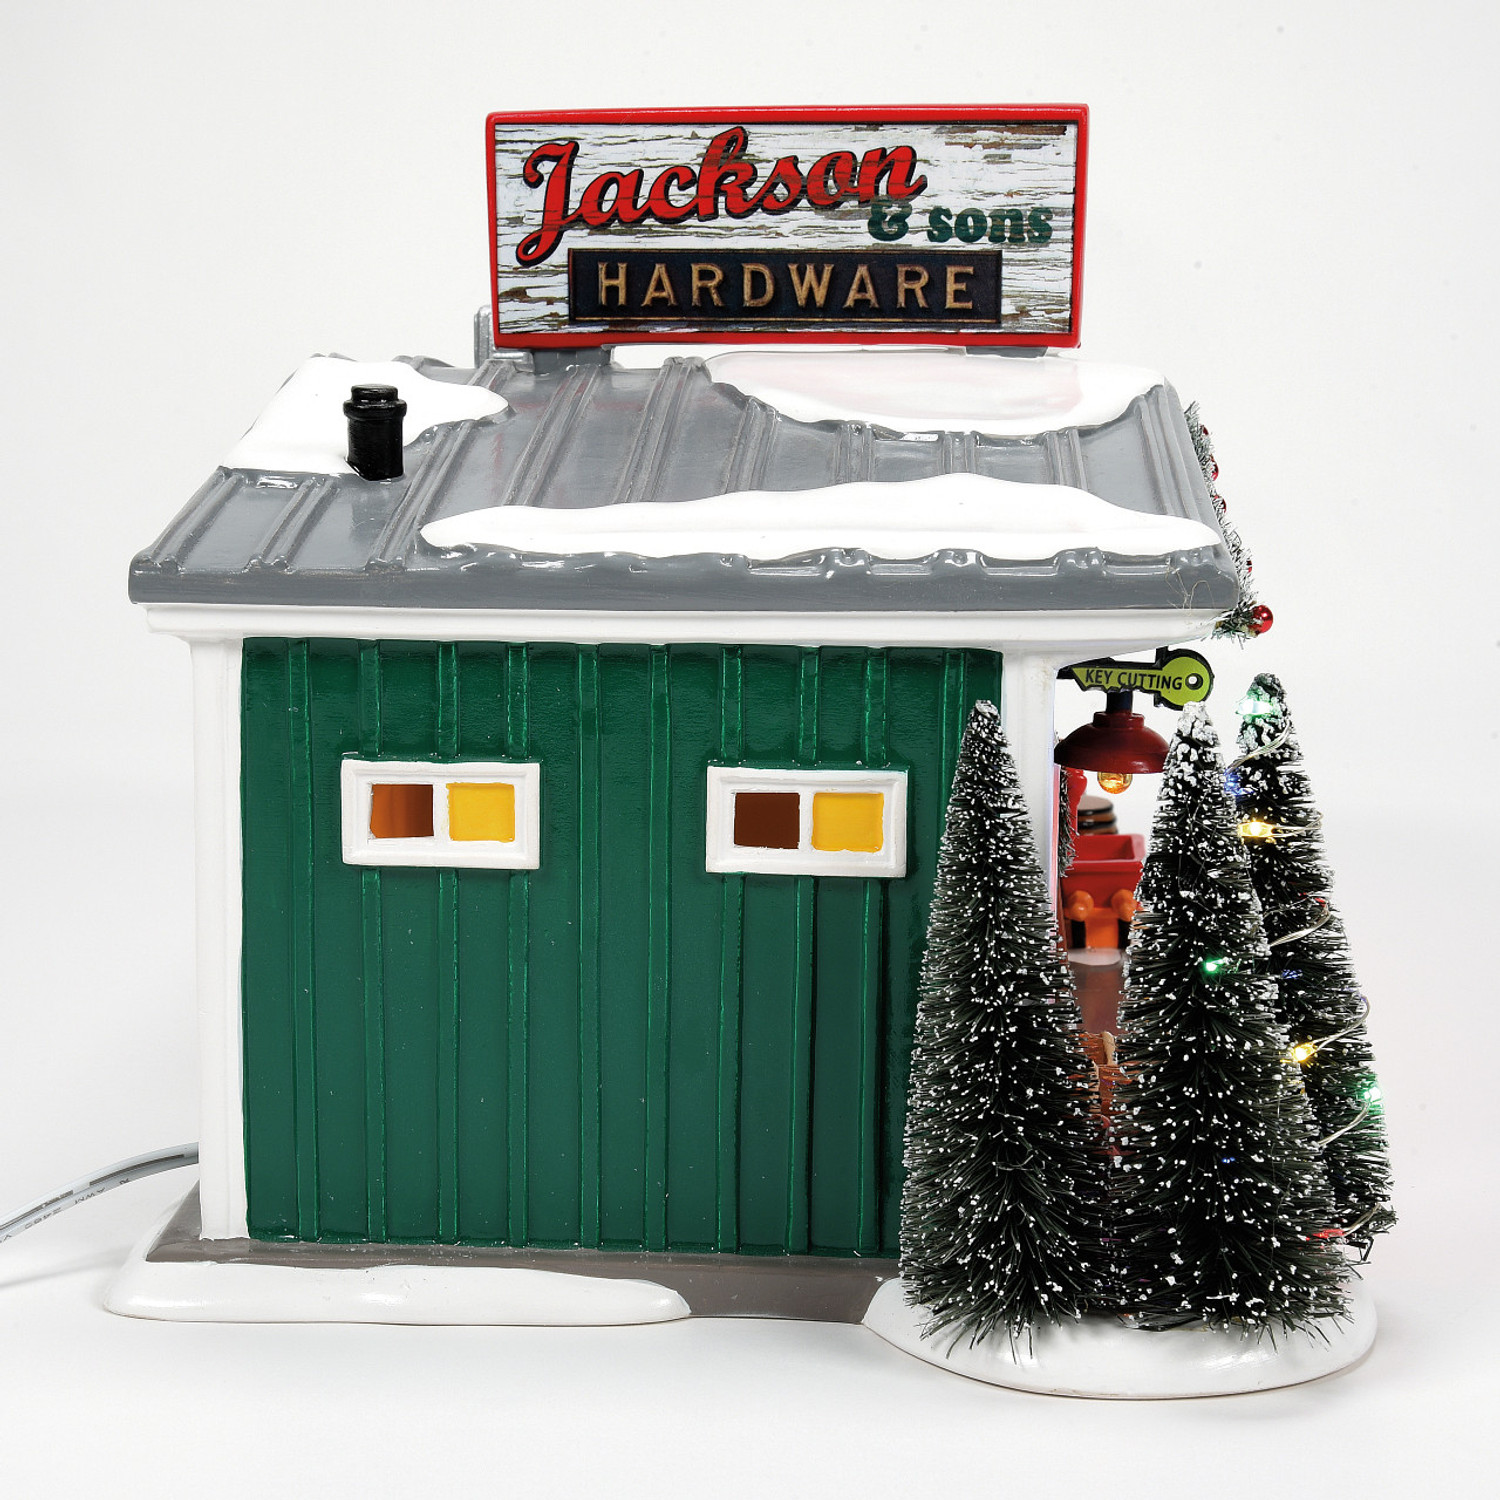 Department 56 First Edition Jackson & Son's Hardware, Department 56, Department  56 Snow Village, Christmas Village, Christmas Collectible